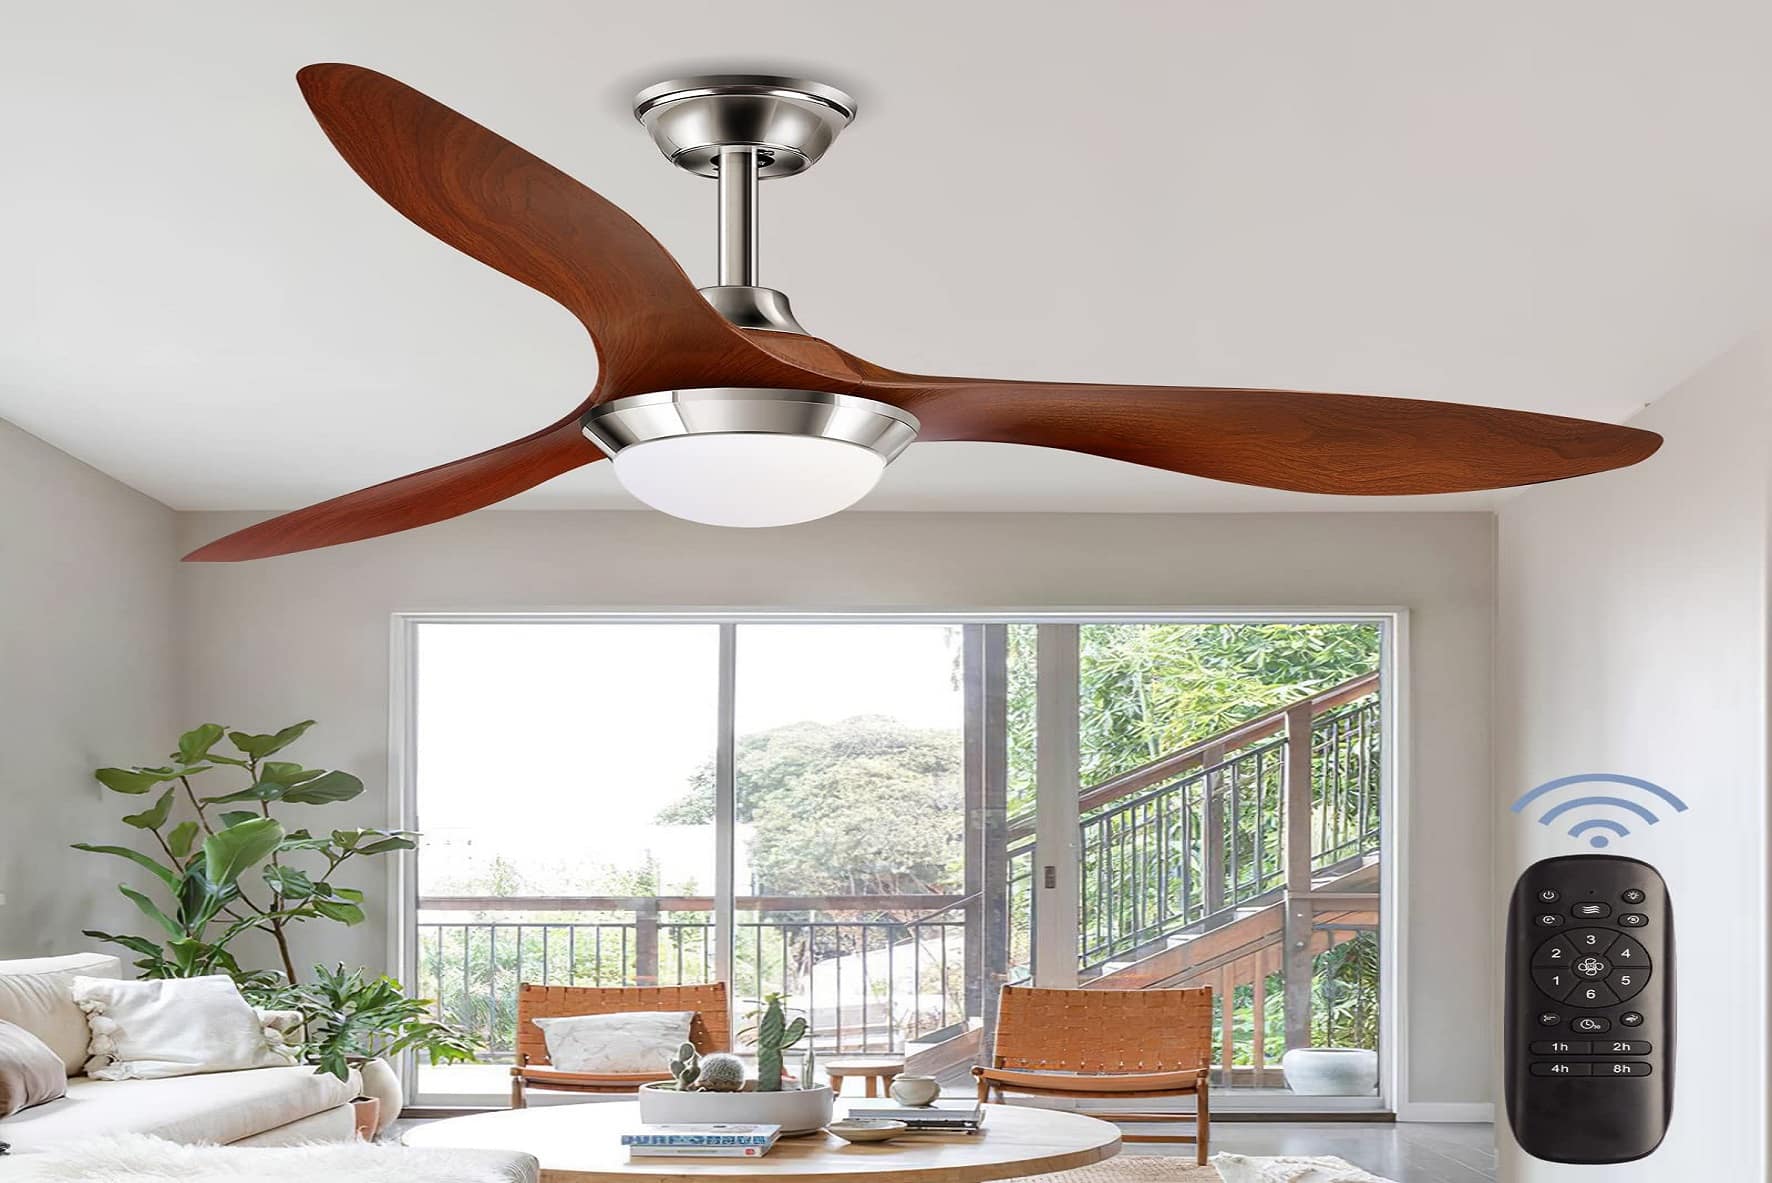 Benefits of Buying A Remote-Controlled Ceiling Fans